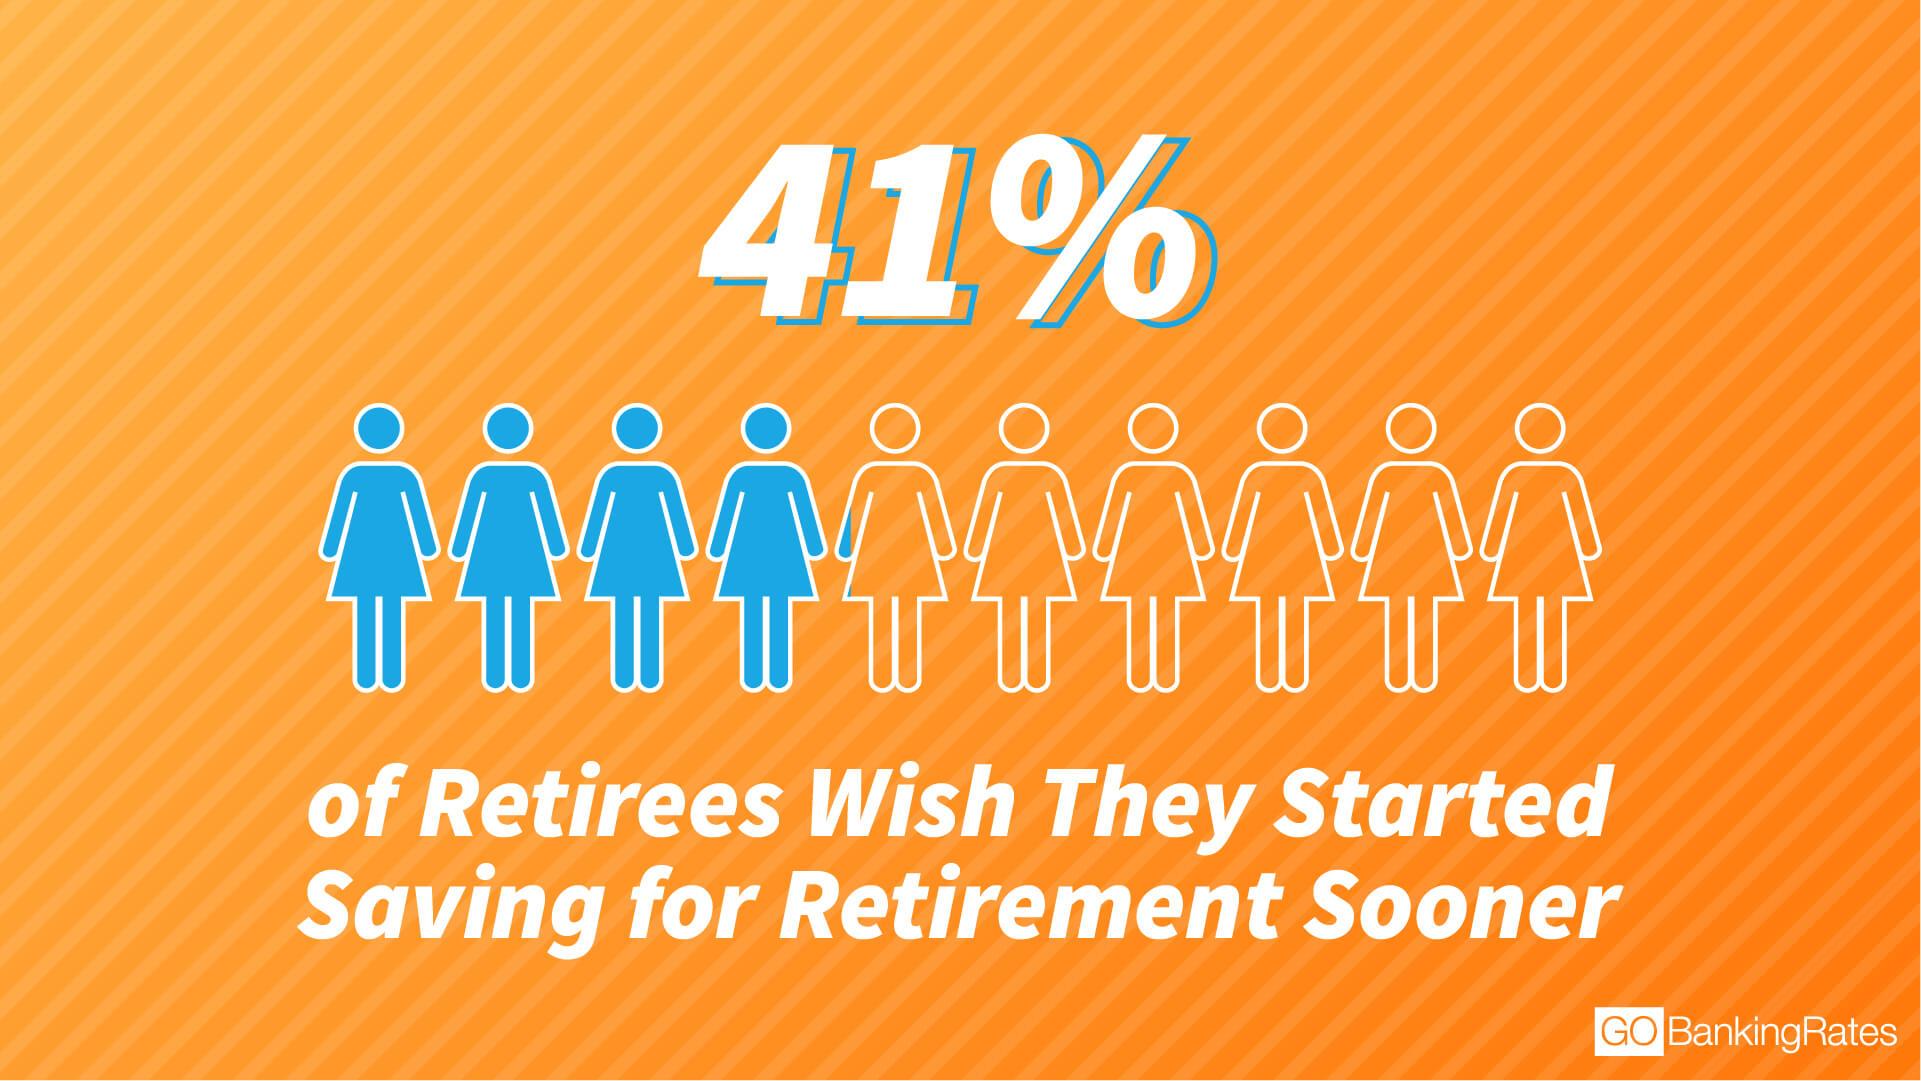 41% of retirees wish they had started saving sooner